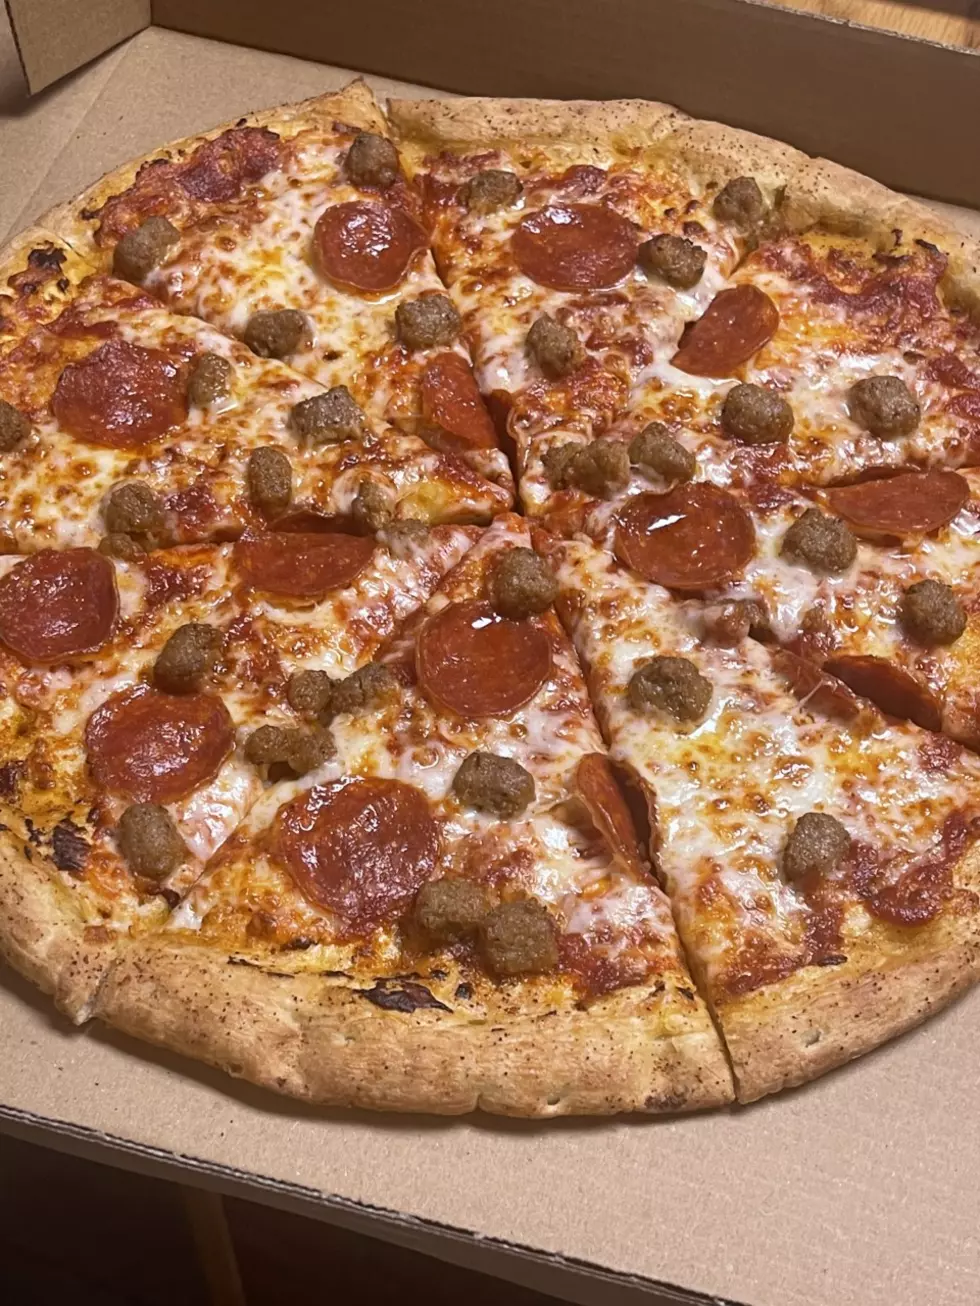 Home Slice Pizza Texarkana Now Open for Take-Out Only